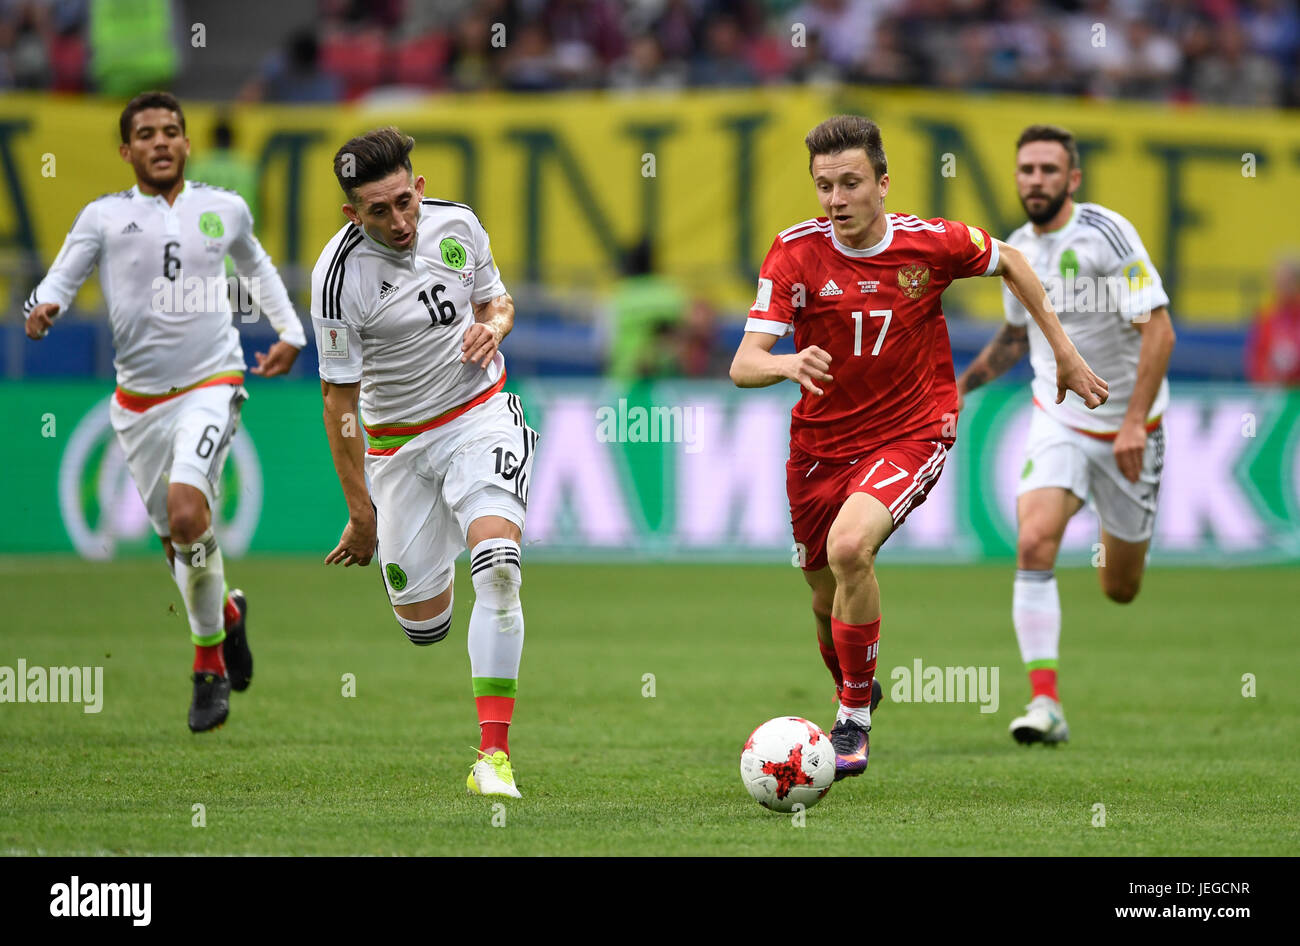 Kazan, Russia. 24th June, 2017. Mexico's Hector Herrera (L) Russia's Alexandr Golovin vie for the ball during the group stage match pitting Mexico against Russia at the Kazan Arena in Kazan, Russia, 24 June 2017. Photo: Marius Becker/dpa/Alamy Live News Stock Photo